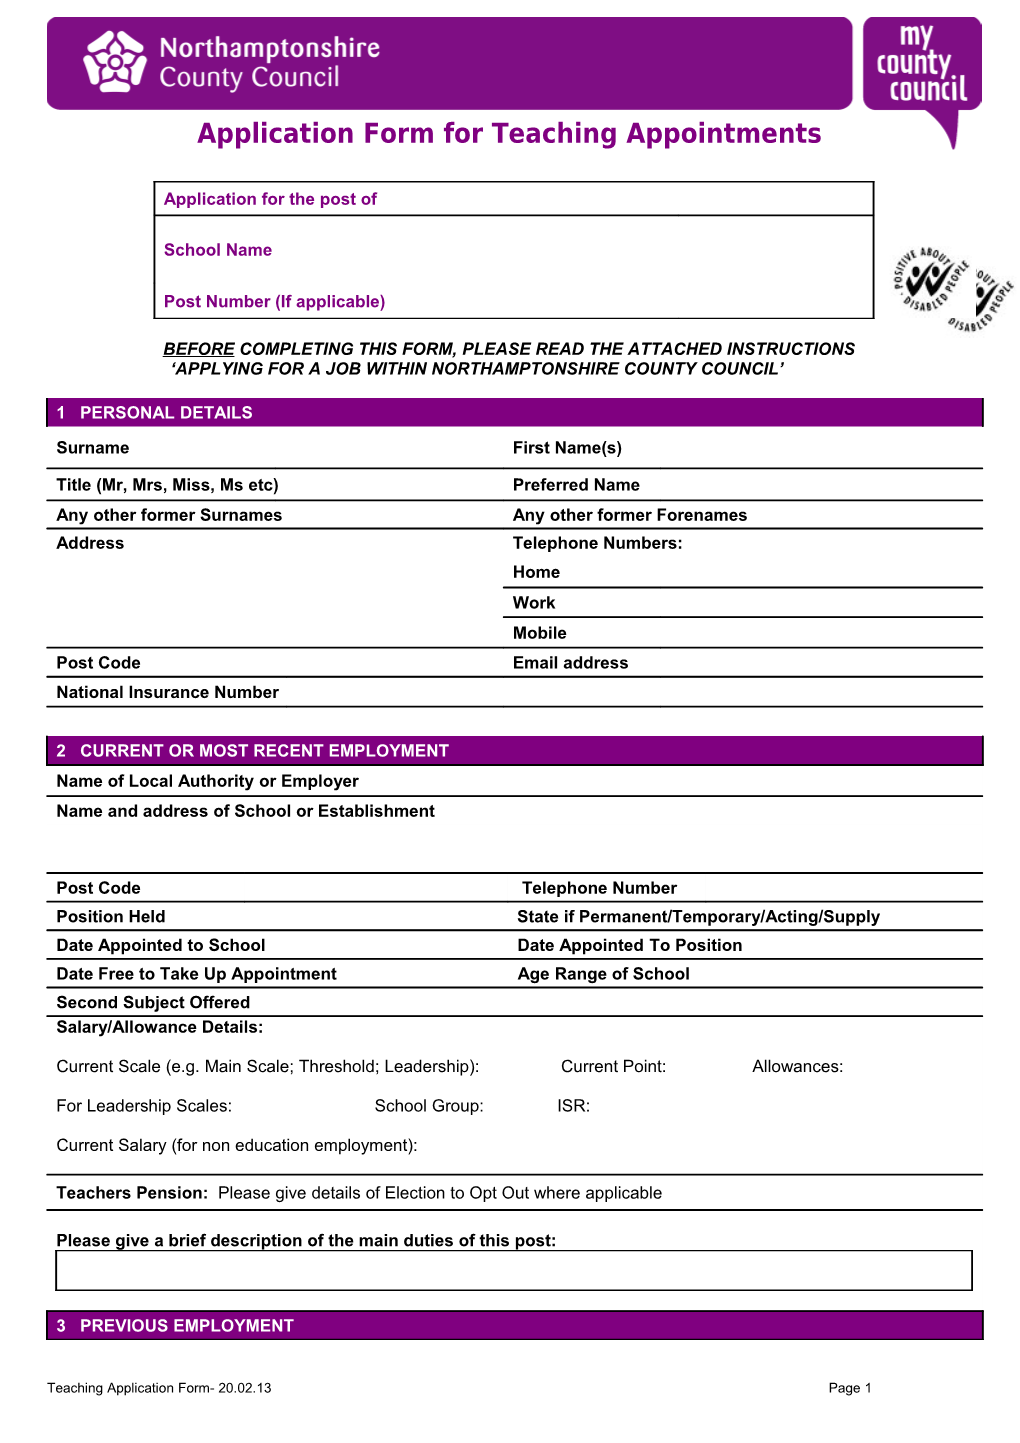 Application Form for Teaching Appointments